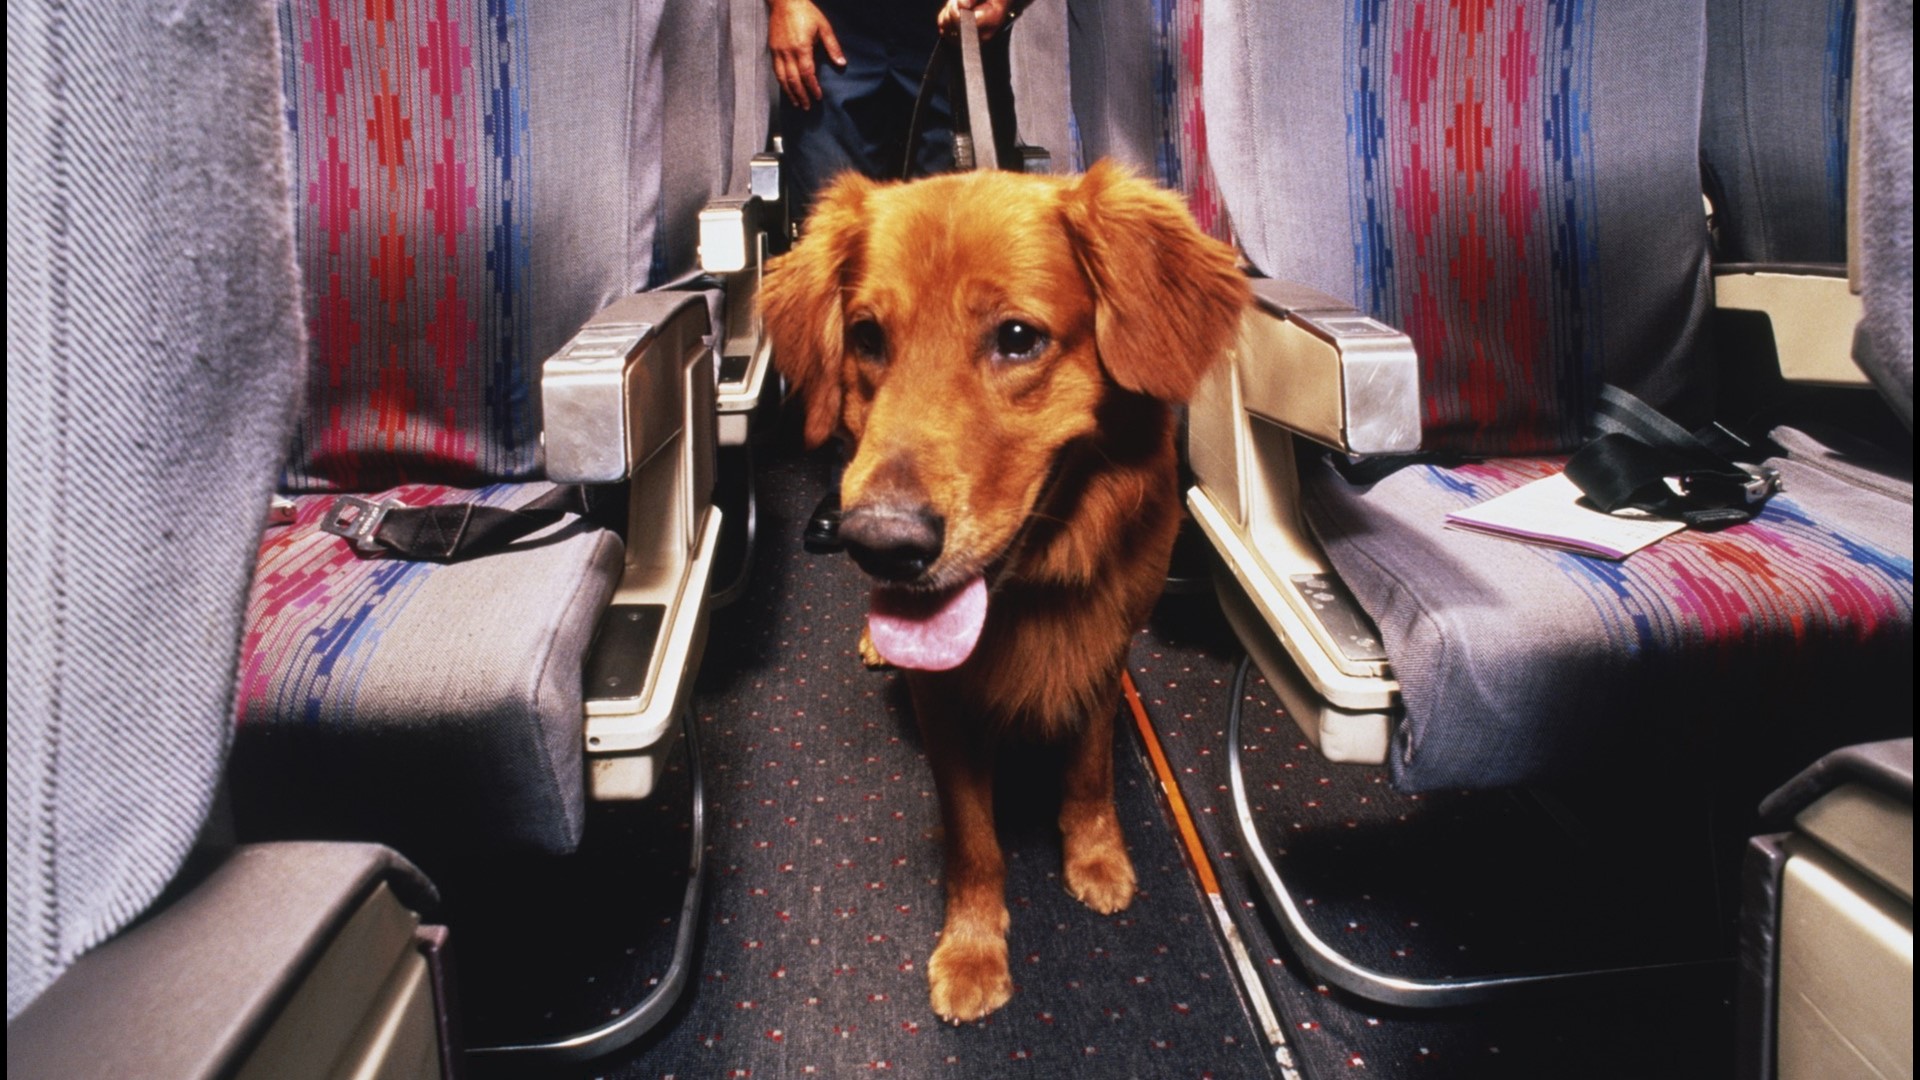 Southwest Airlines bans emotional support animals, joining others 